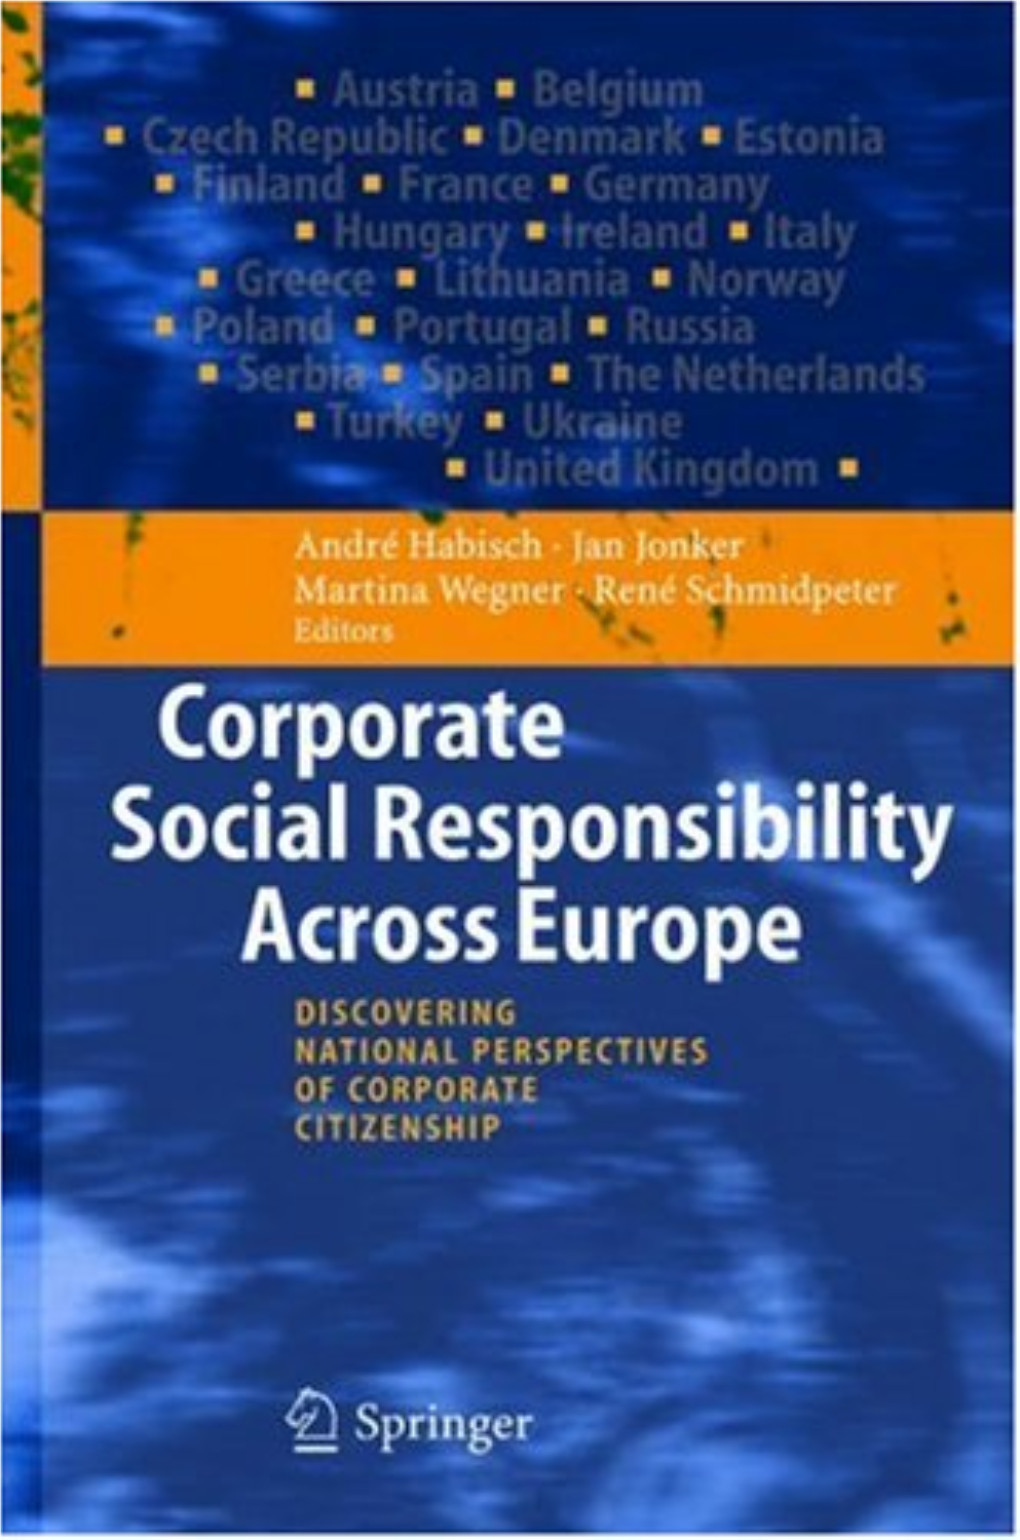 Corporate Social Responsibility Across Europe Andr Habisch ´ Jan Jonker Martina Wegner ´ Ren Schmidpeter (Editors)